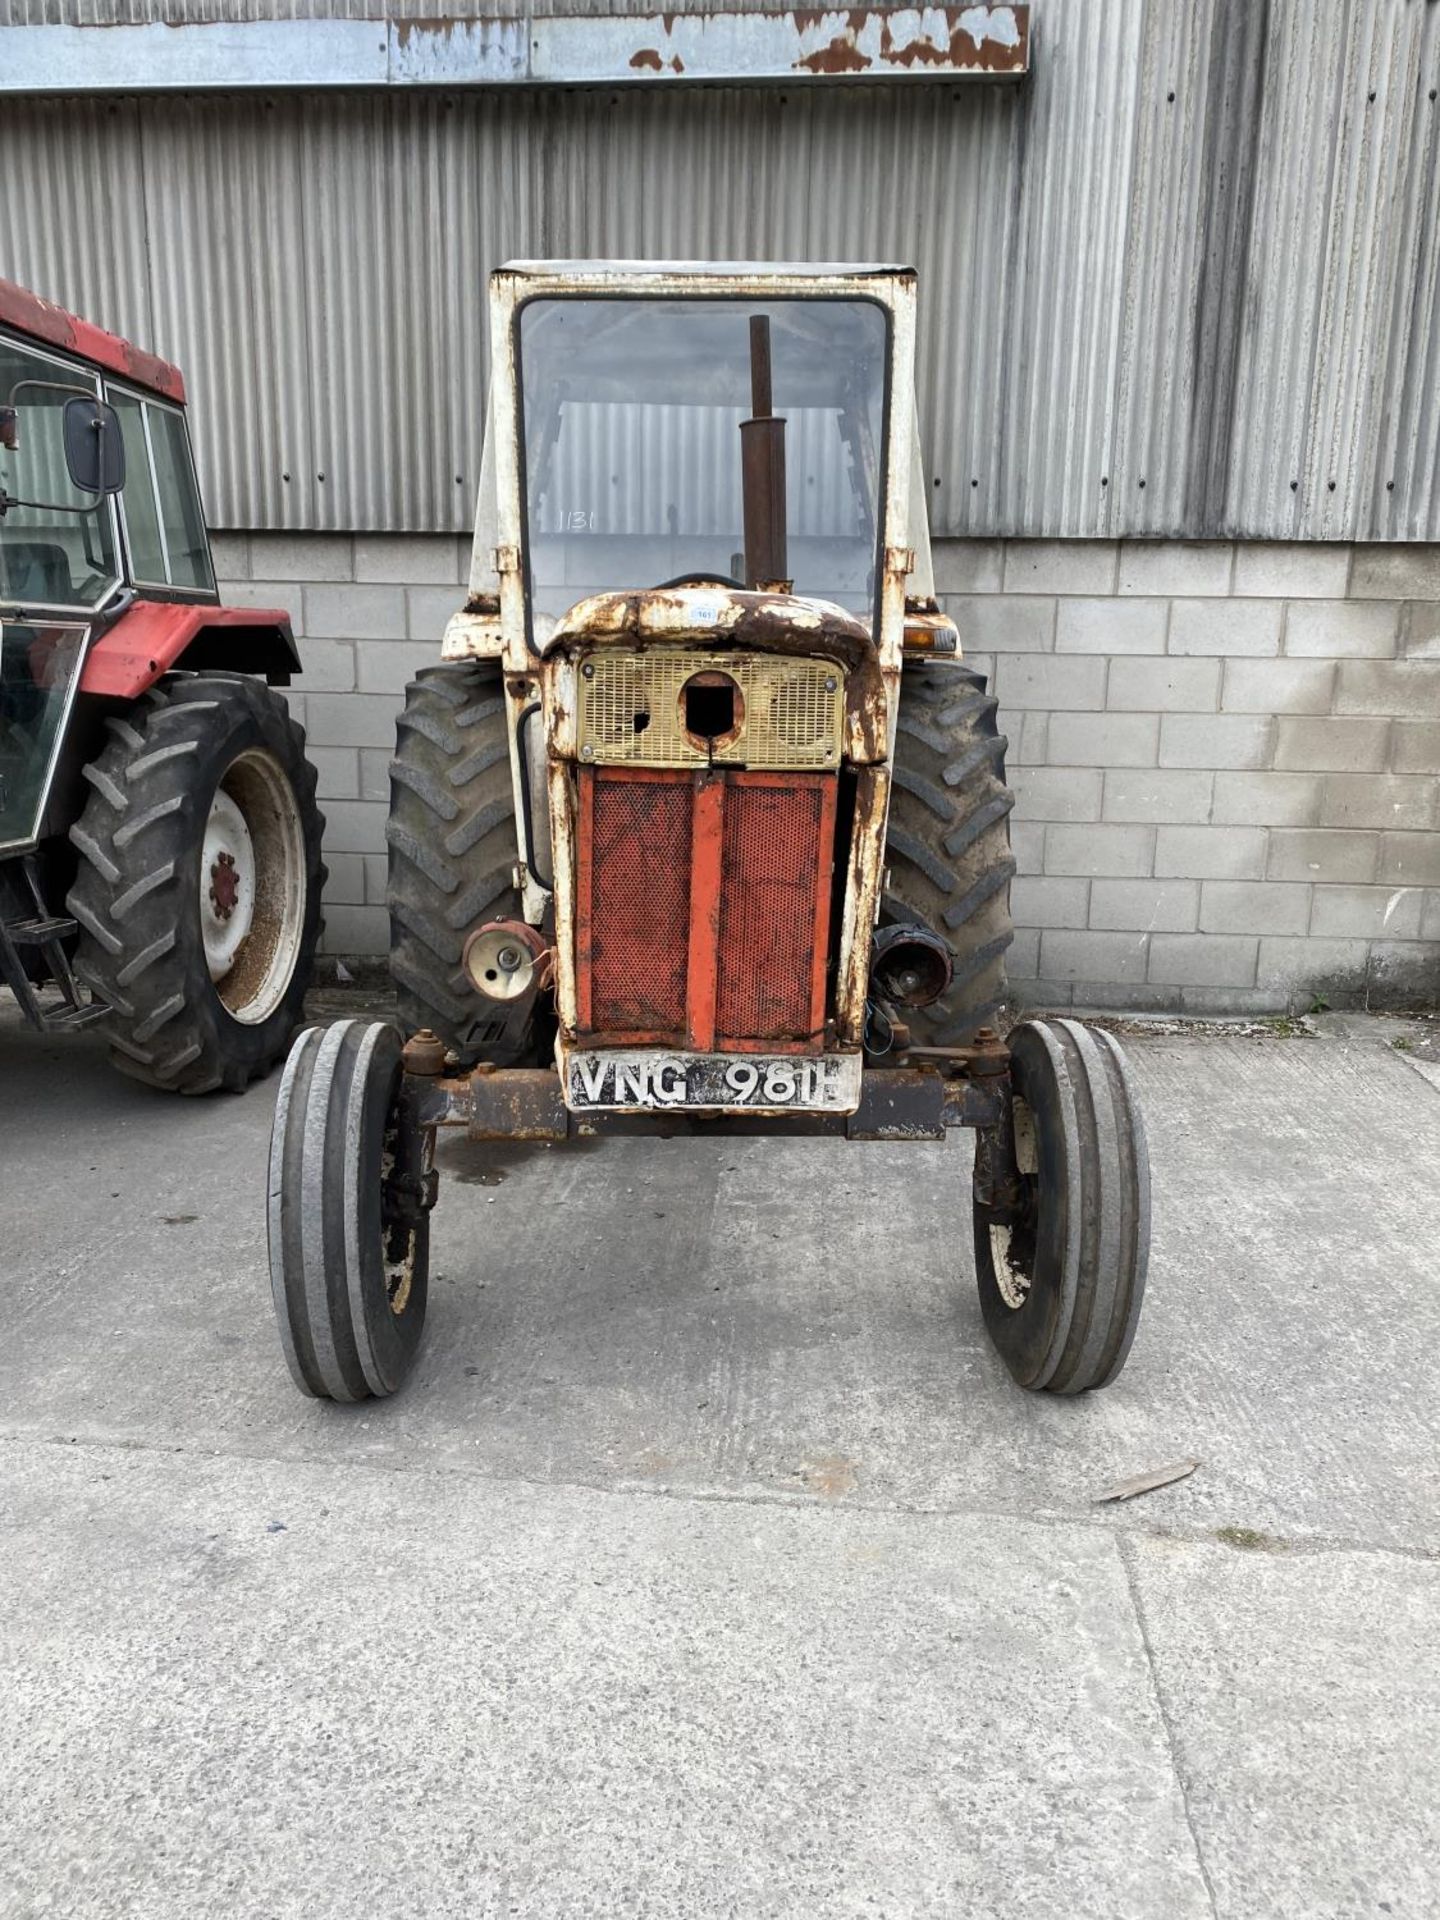 DAVID BROWN 1200 SELECTAMATIC TRACTOR IT WAS DRIVEN OFF A LOW LOADER THE VENDOR SAYS IT RUNS WELL NO - Image 2 of 6